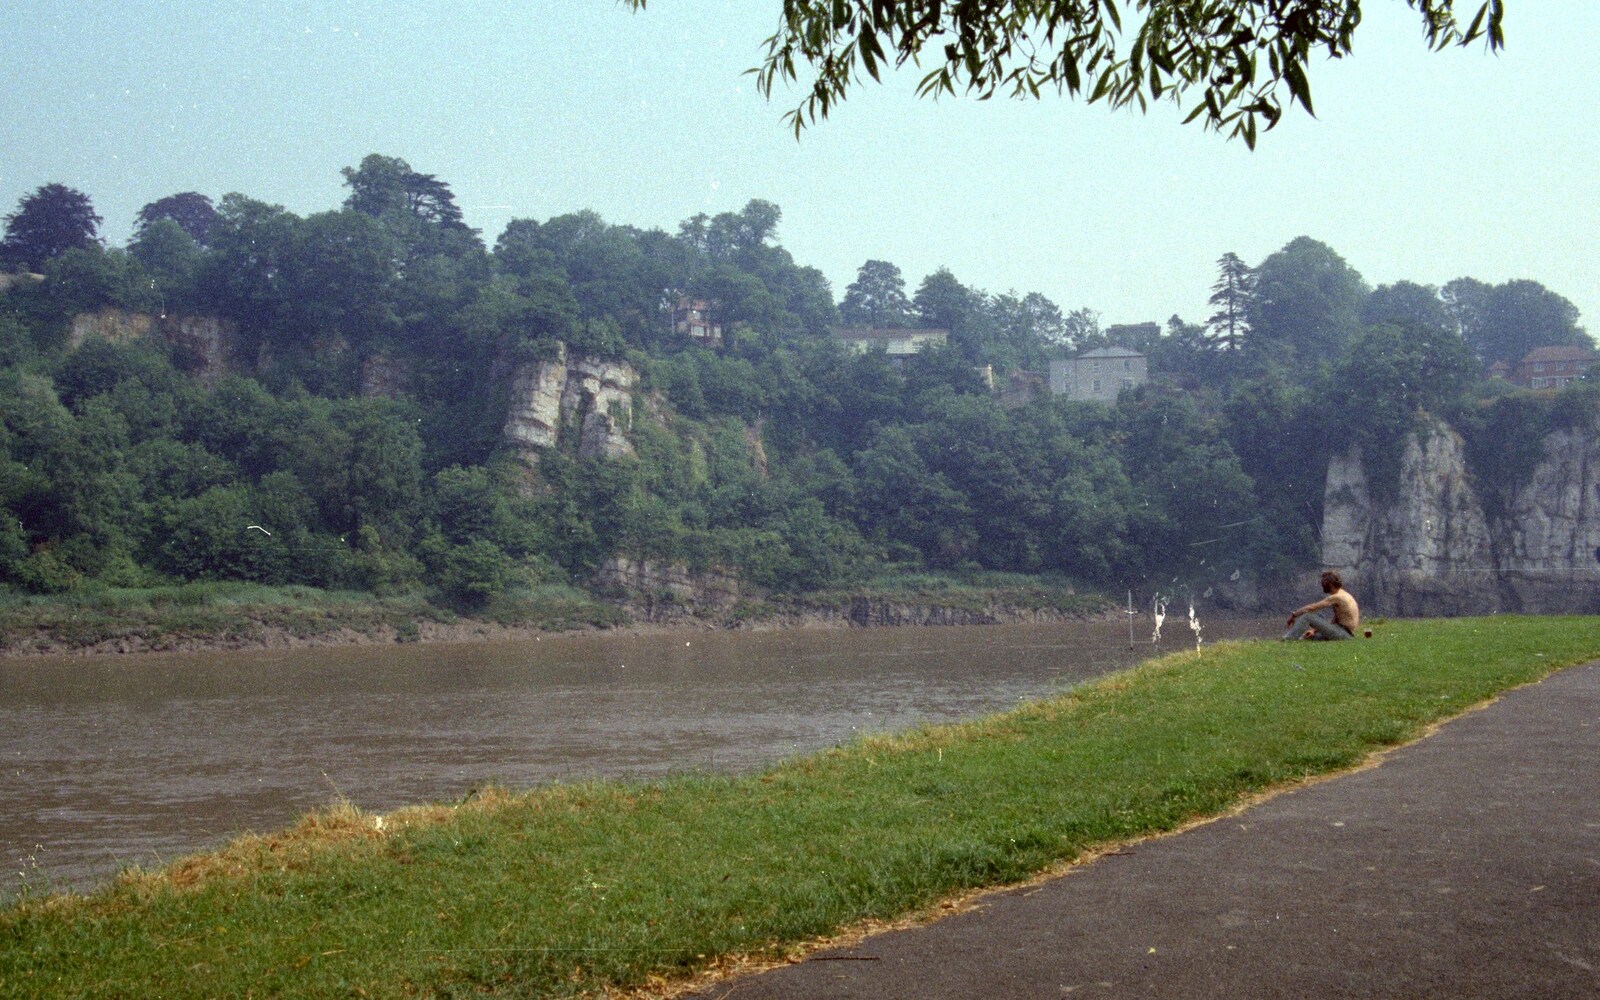 Some dude sits on the bank by the river from A Trip to Chepstow, Monmouthshire, Wales - 5th July 1986